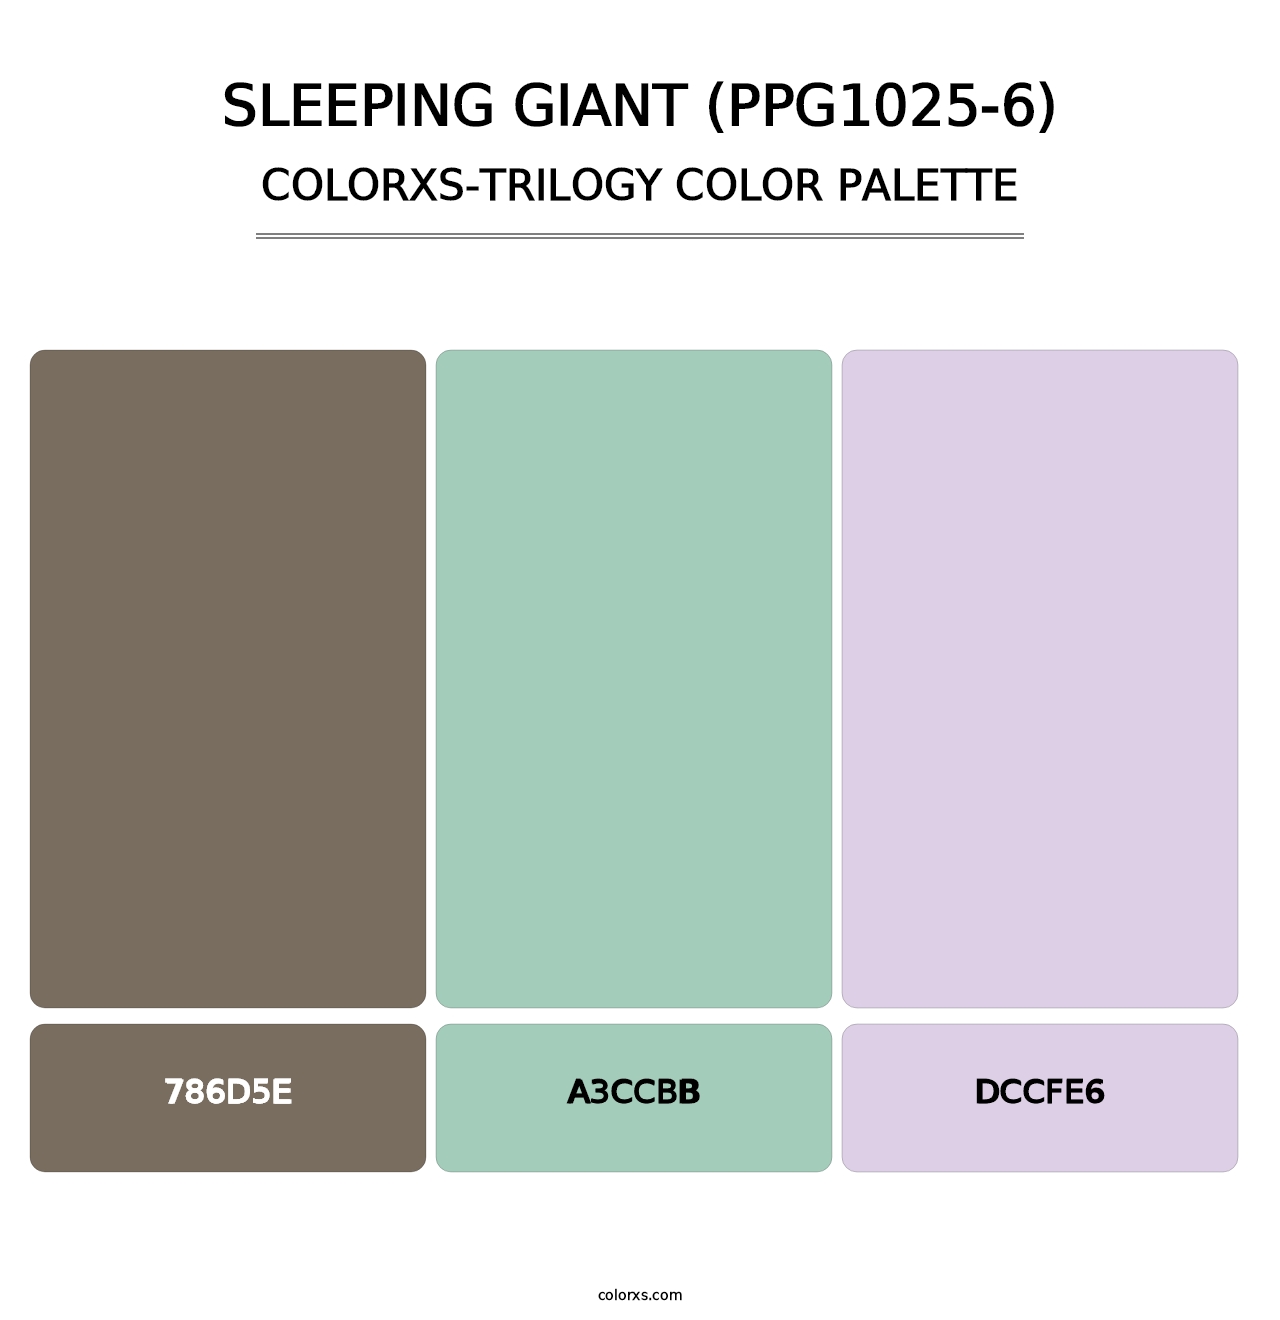 Sleeping Giant (PPG1025-6) - Colorxs Trilogy Palette